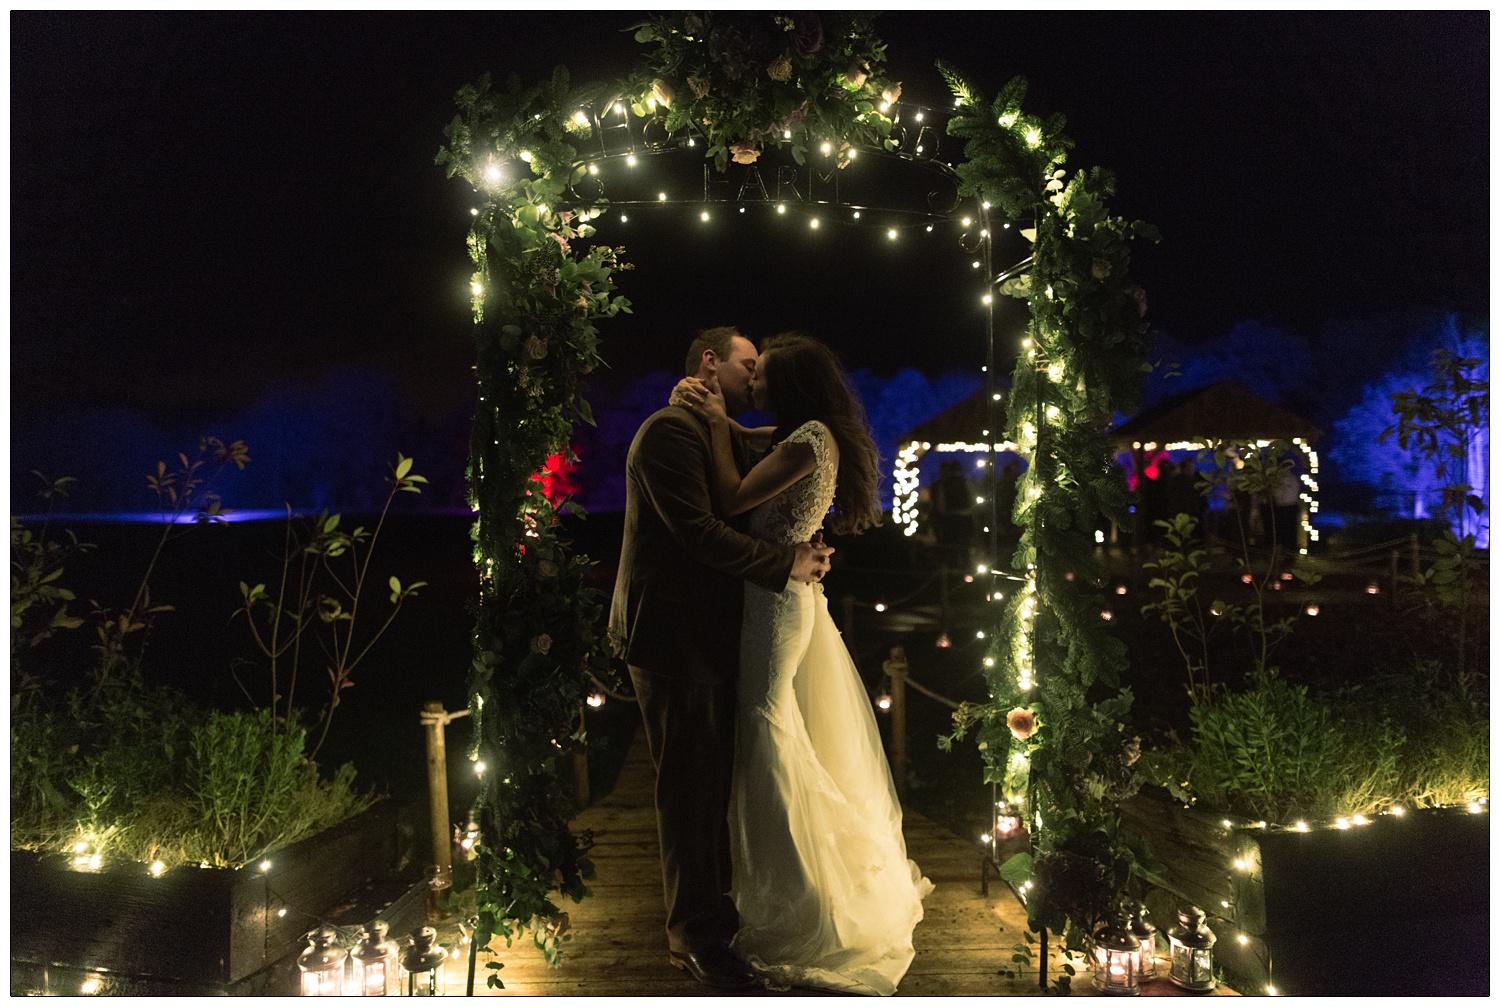 Under an arch that says Honeywood Farm a bride and groom kiss. The trees in the background are lit up blue.